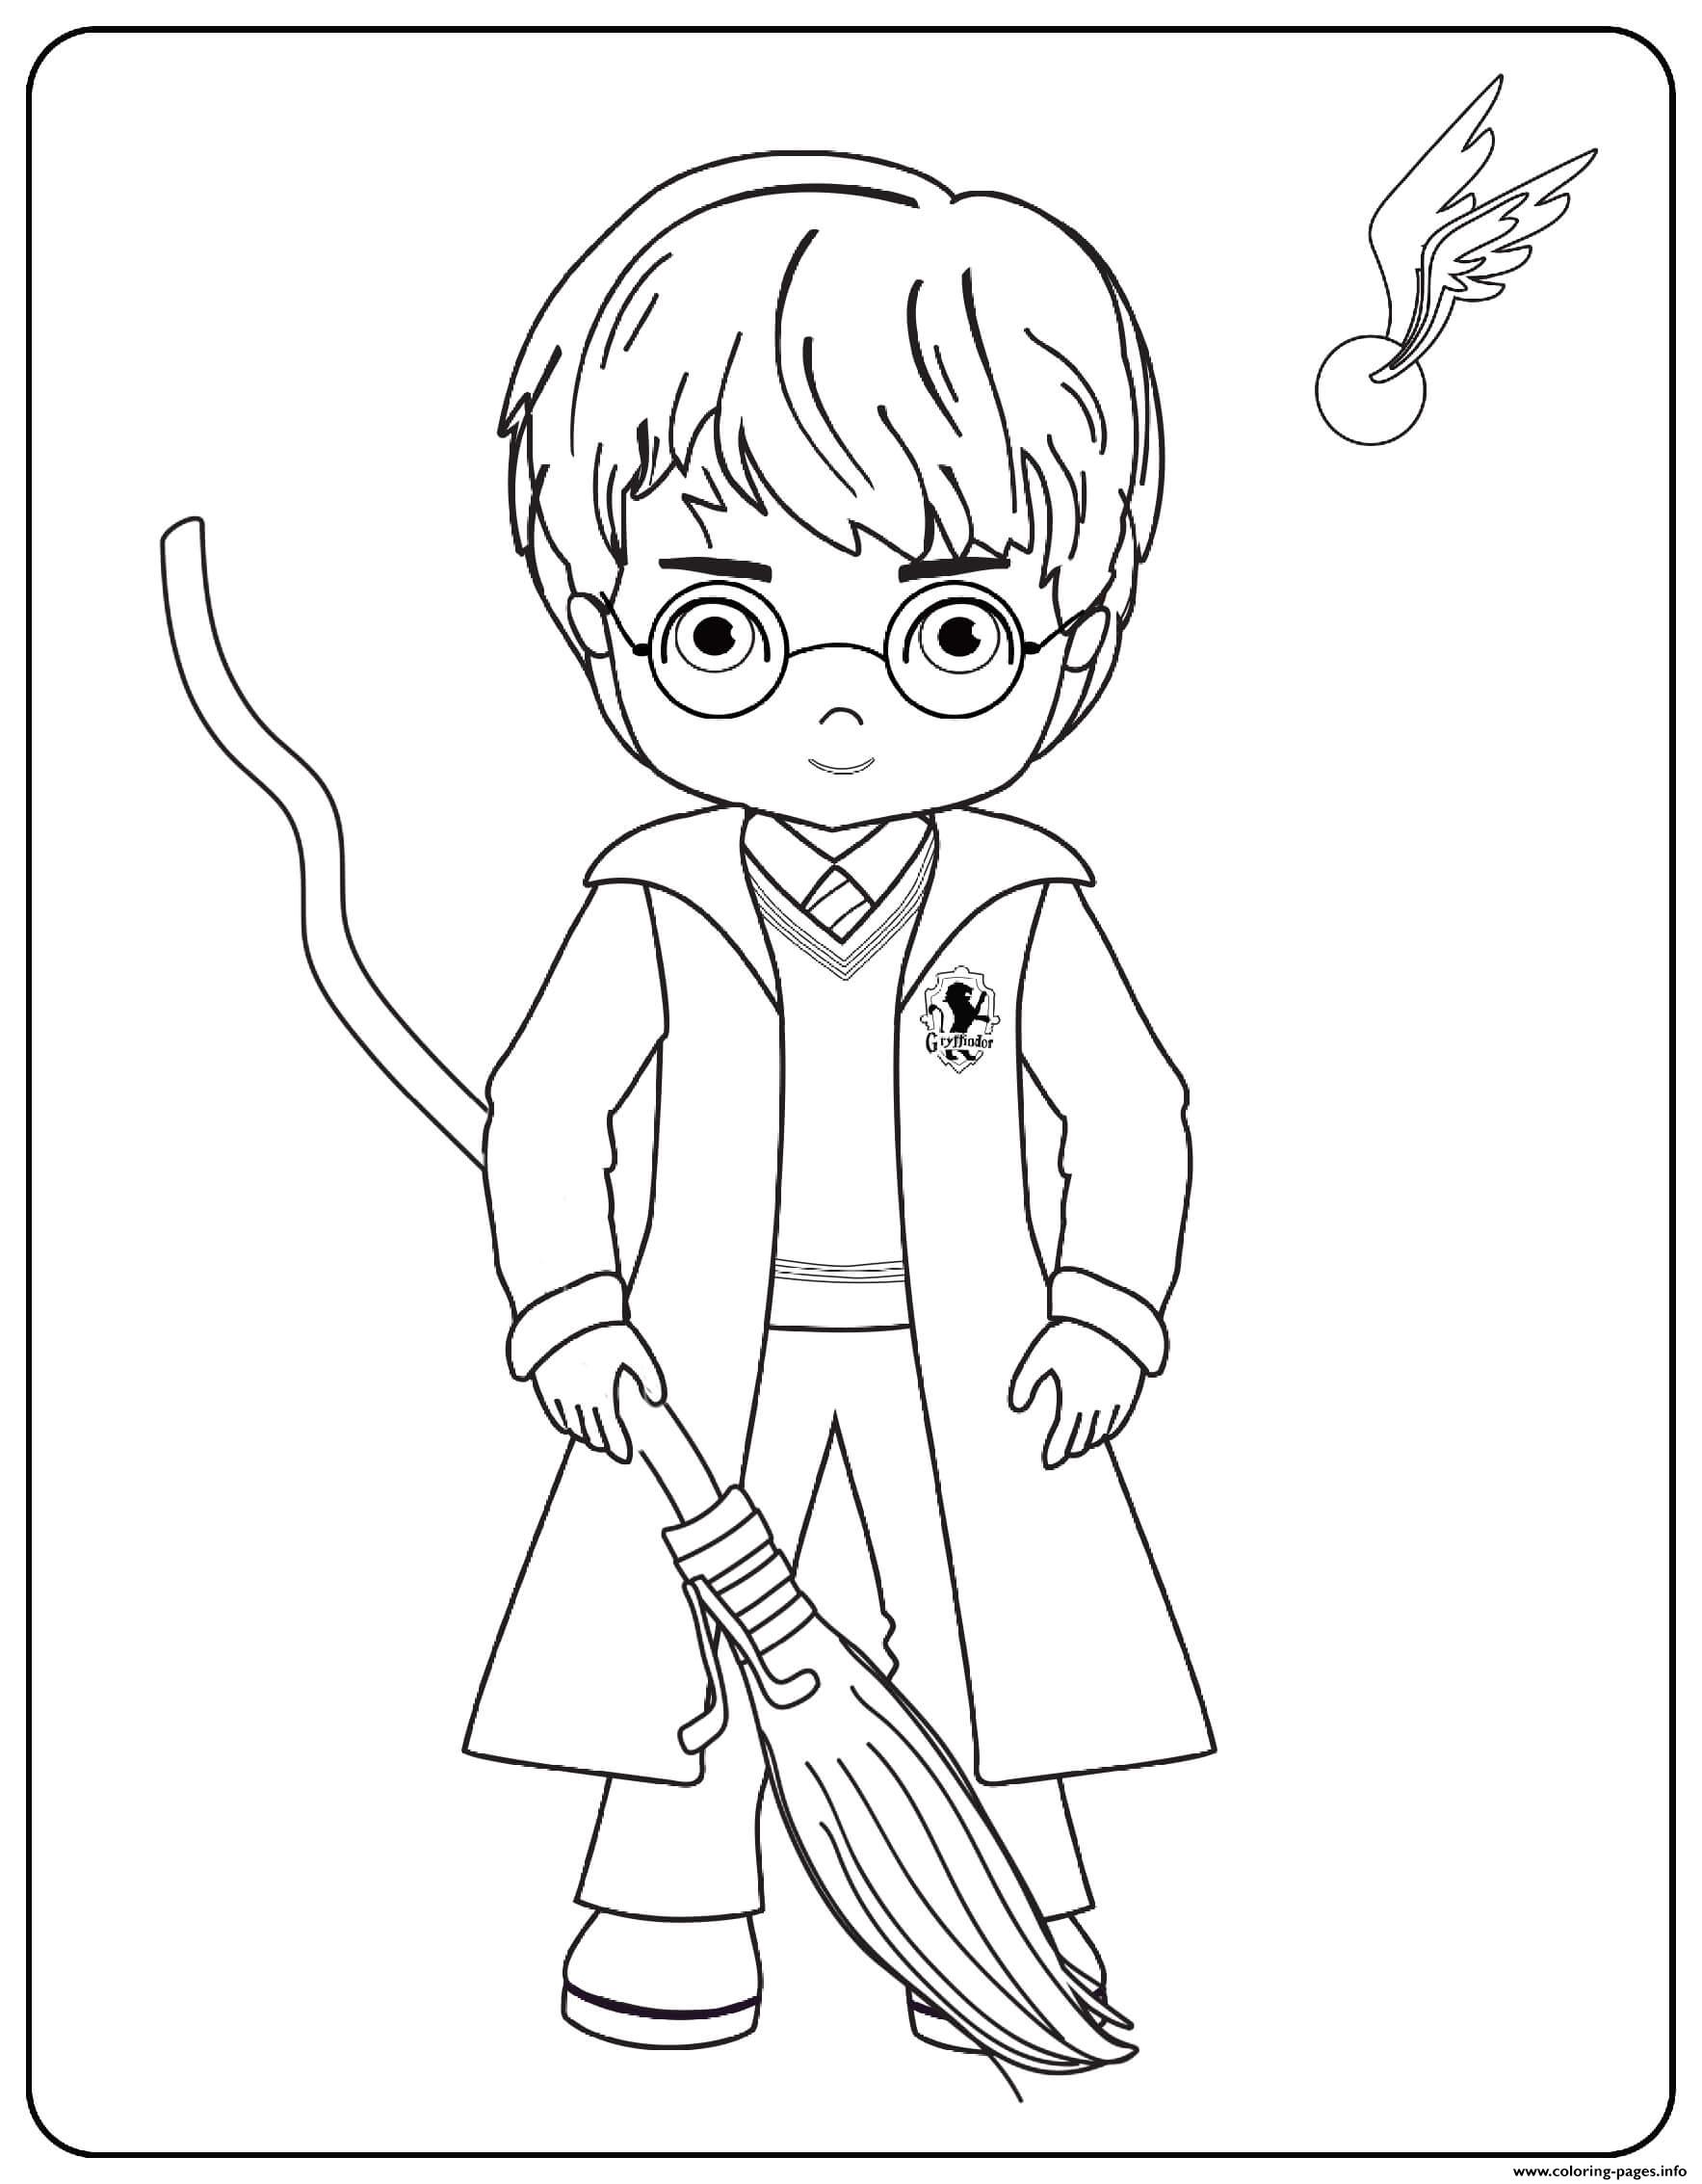 Harry With Broom coloring